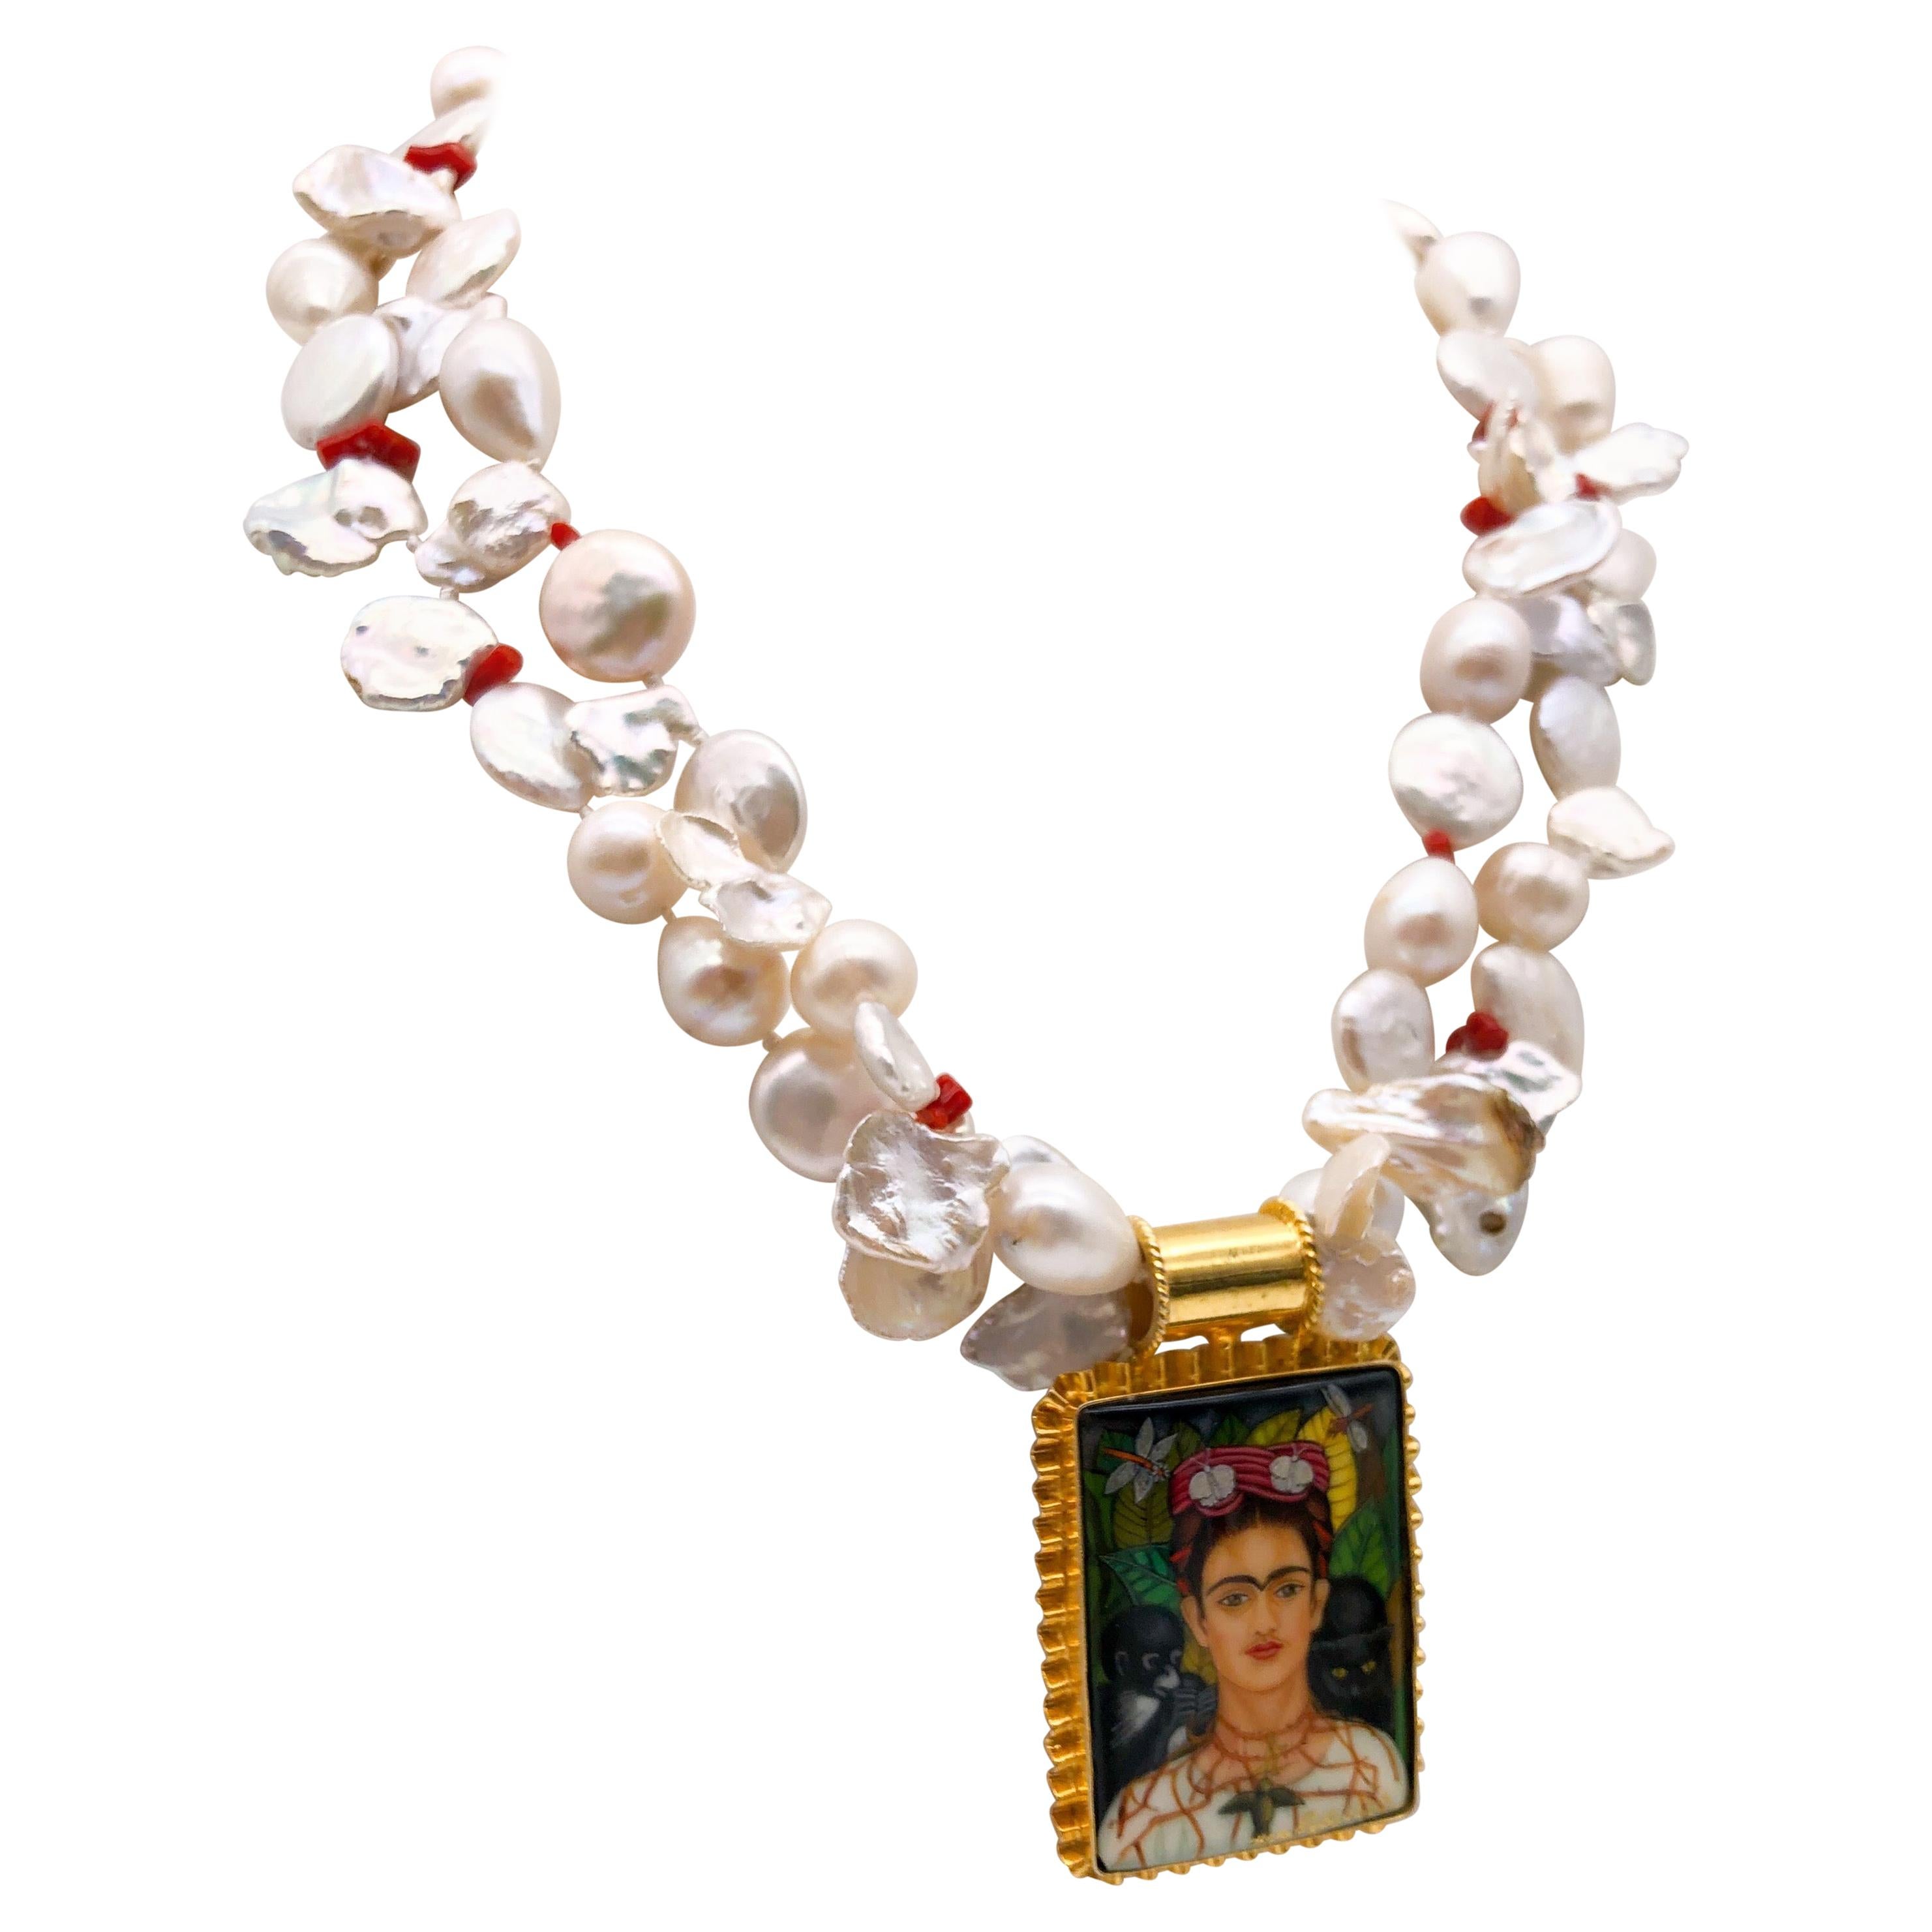 A.Jeschel 2 strand pearl necklace surrounds Russian hand-painted pendant.